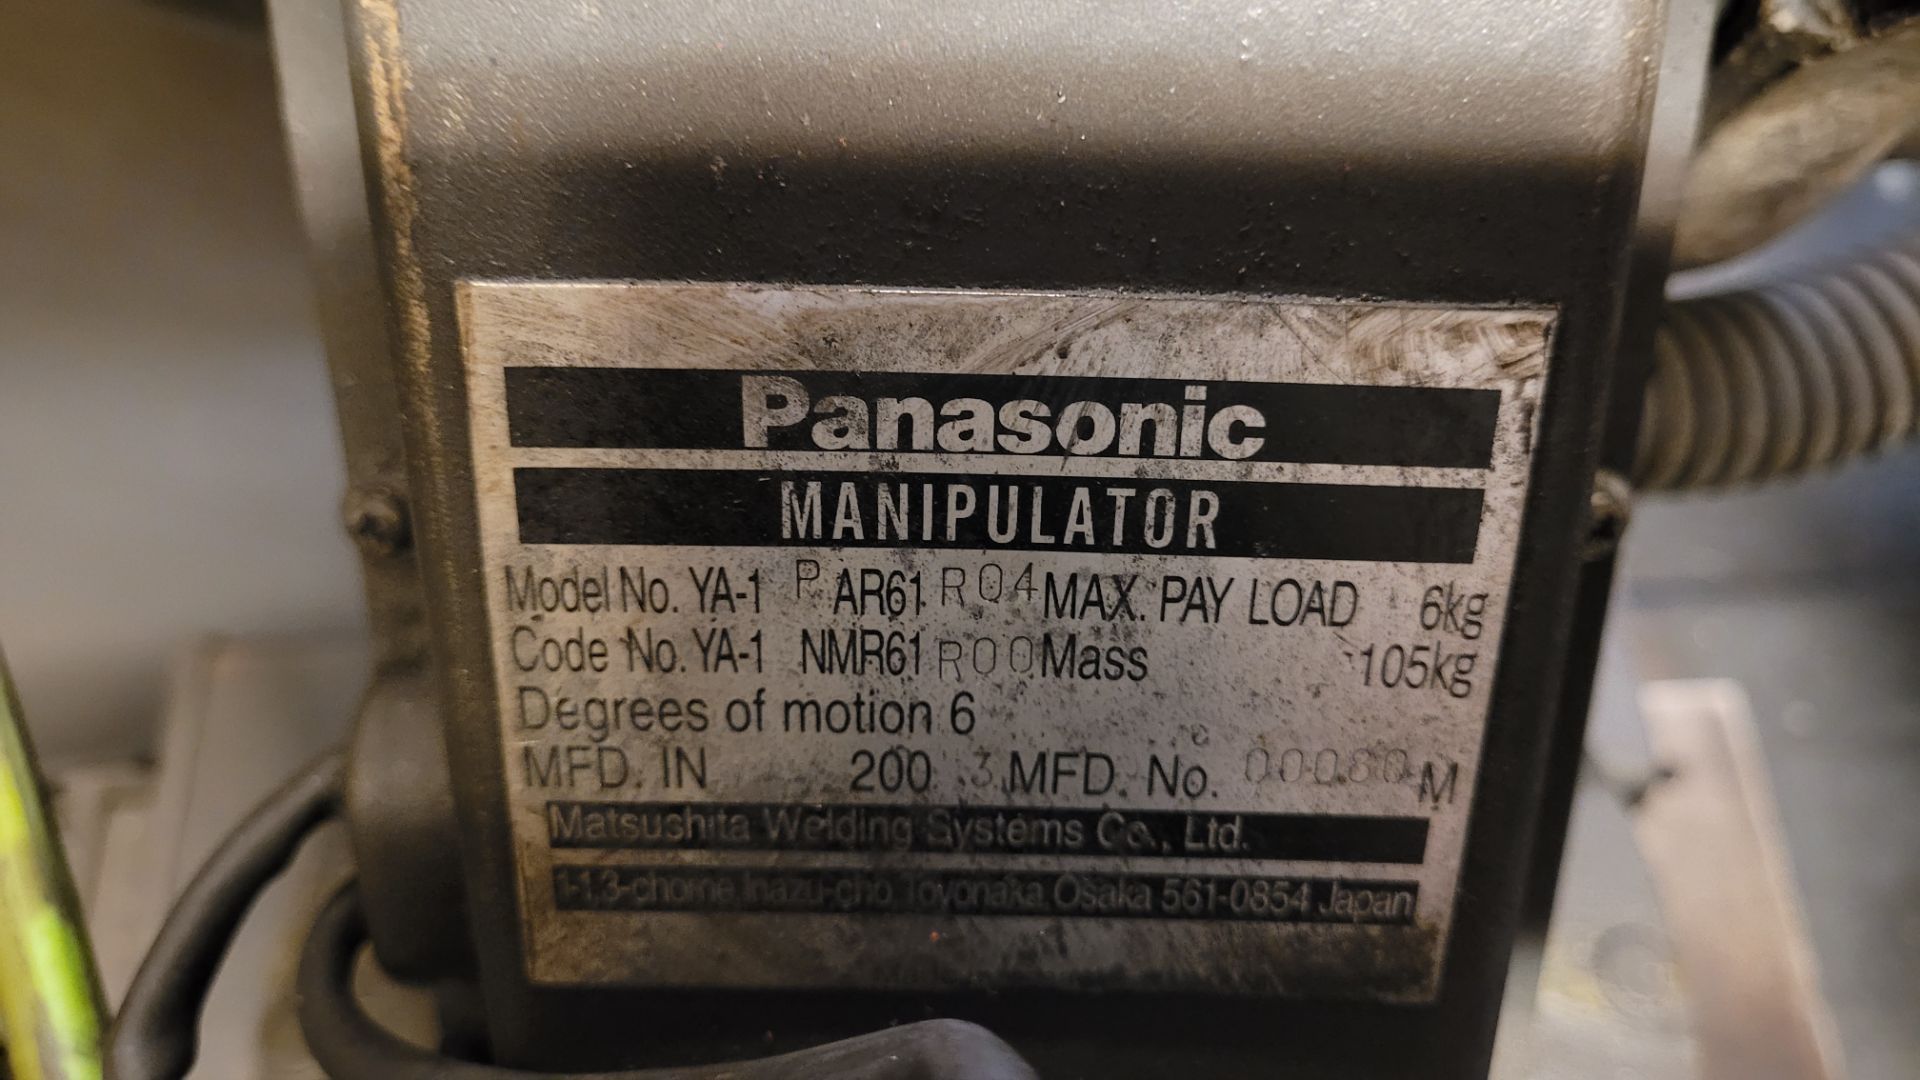 2004 PANASONIC VR-006 WELDING ROBOT, 6-AXIS, 6KG PAYLOAD, MODEL PA102S CONTROL PANEL, S/N J0484, - Image 5 of 13